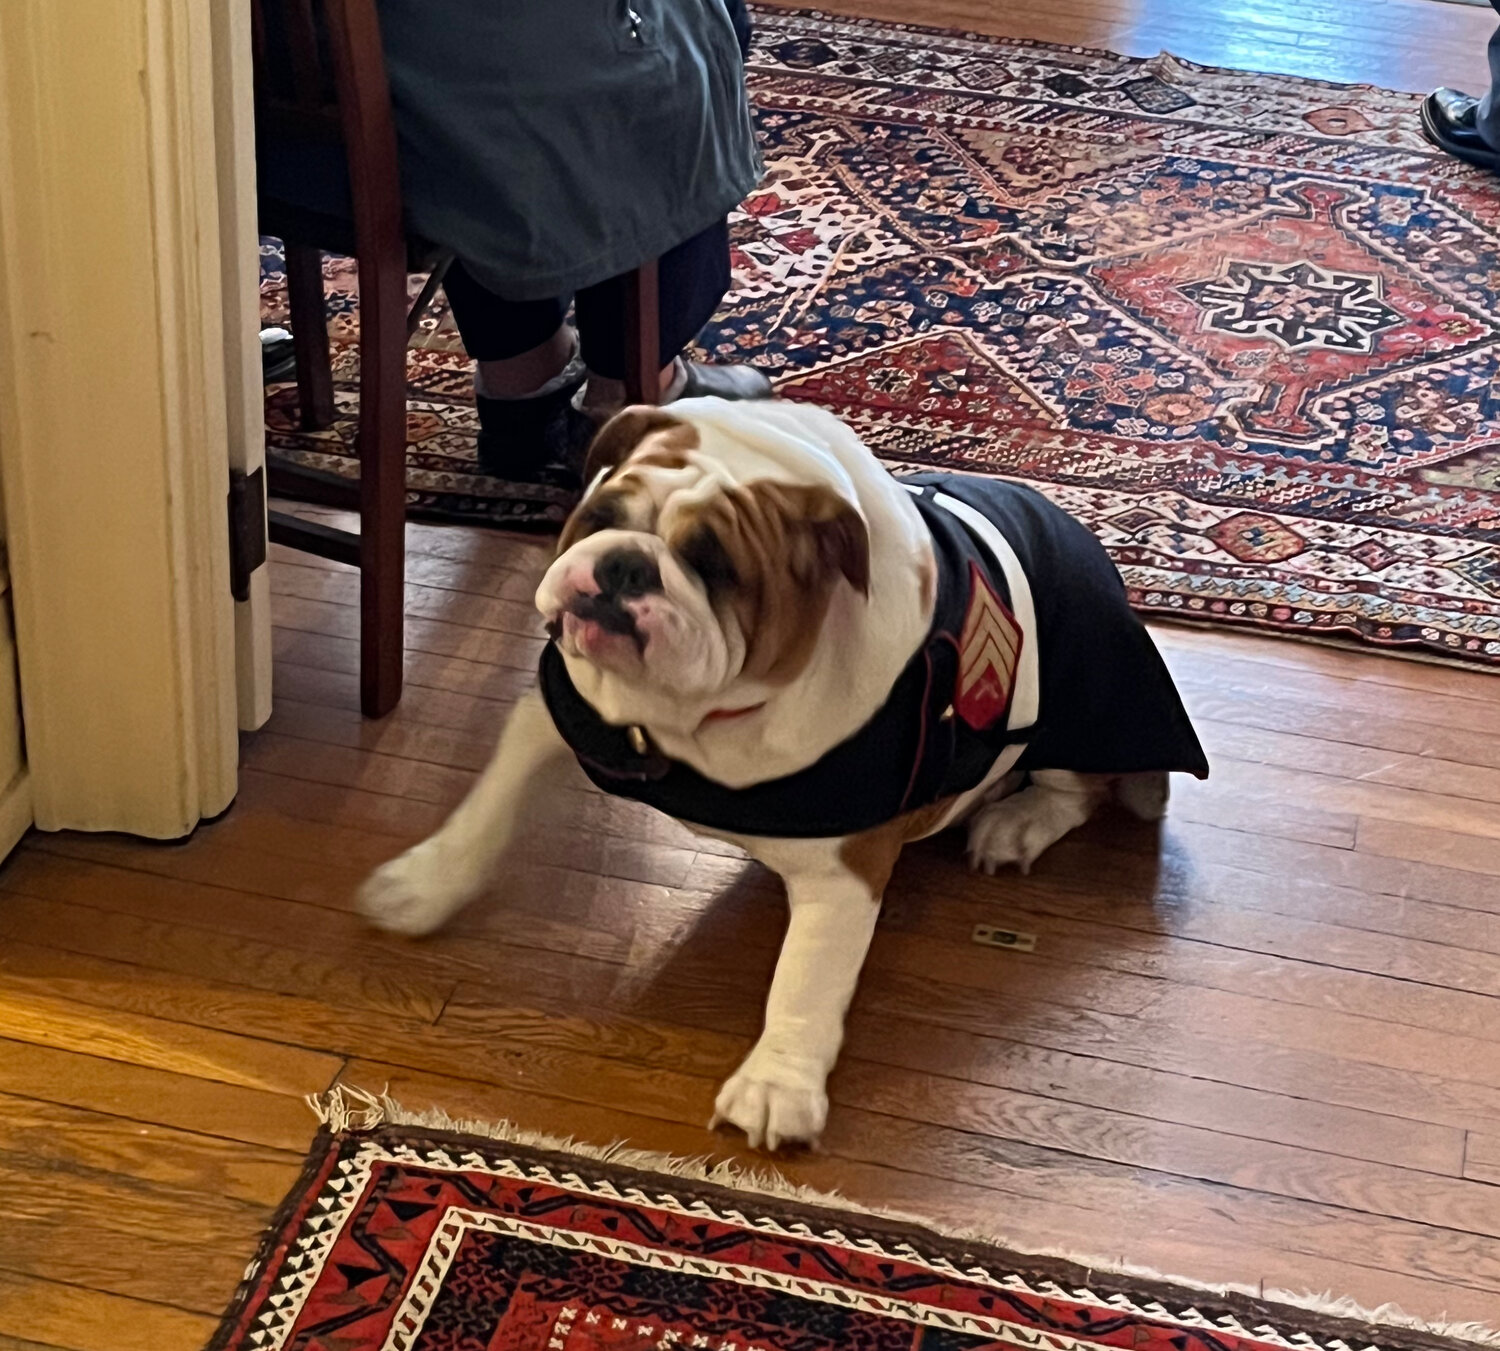 Bulldog Sgt. Leatherneck, of Colmar, joined the fun at the birthday party for veterans Sunday in Bristol Borough headquarters of the Washington Crossing Foundation.